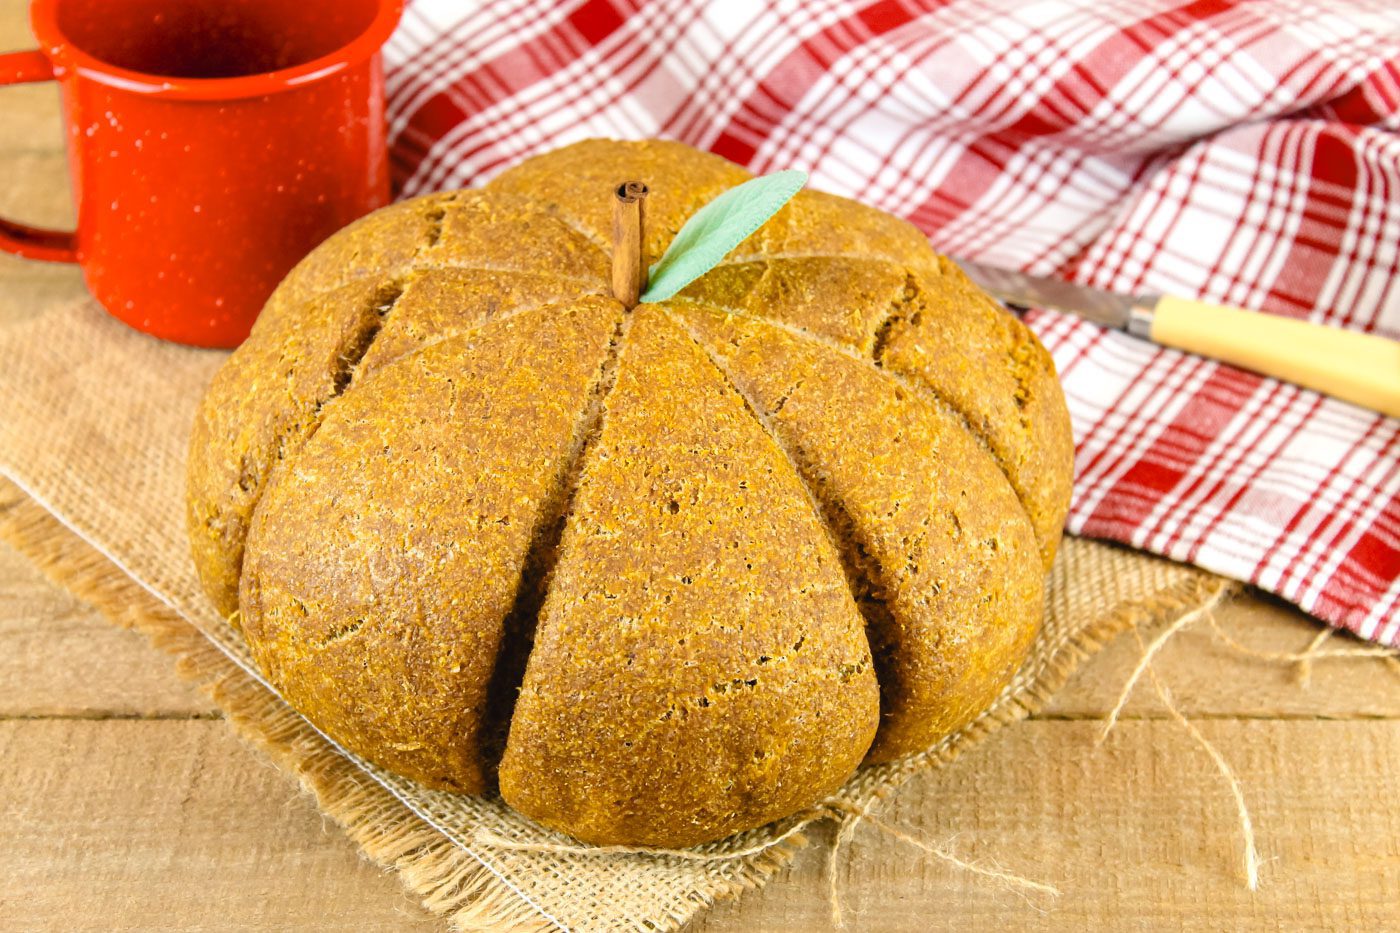 pumpkin shaped loaf of bread sits in front of a red mug and a red plaid kitchen towel